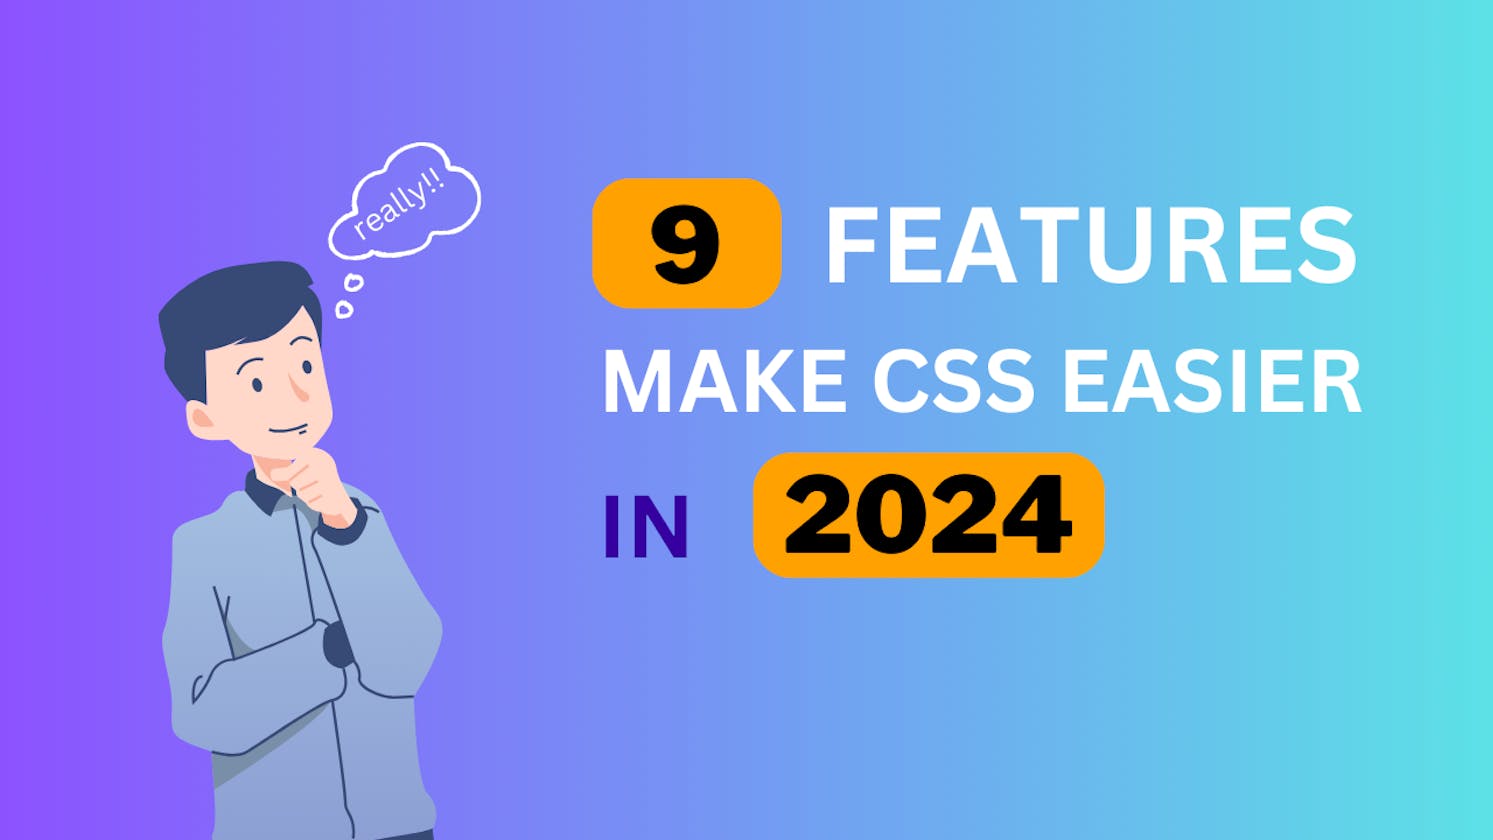 9 Features Make CSS Easier in 2024